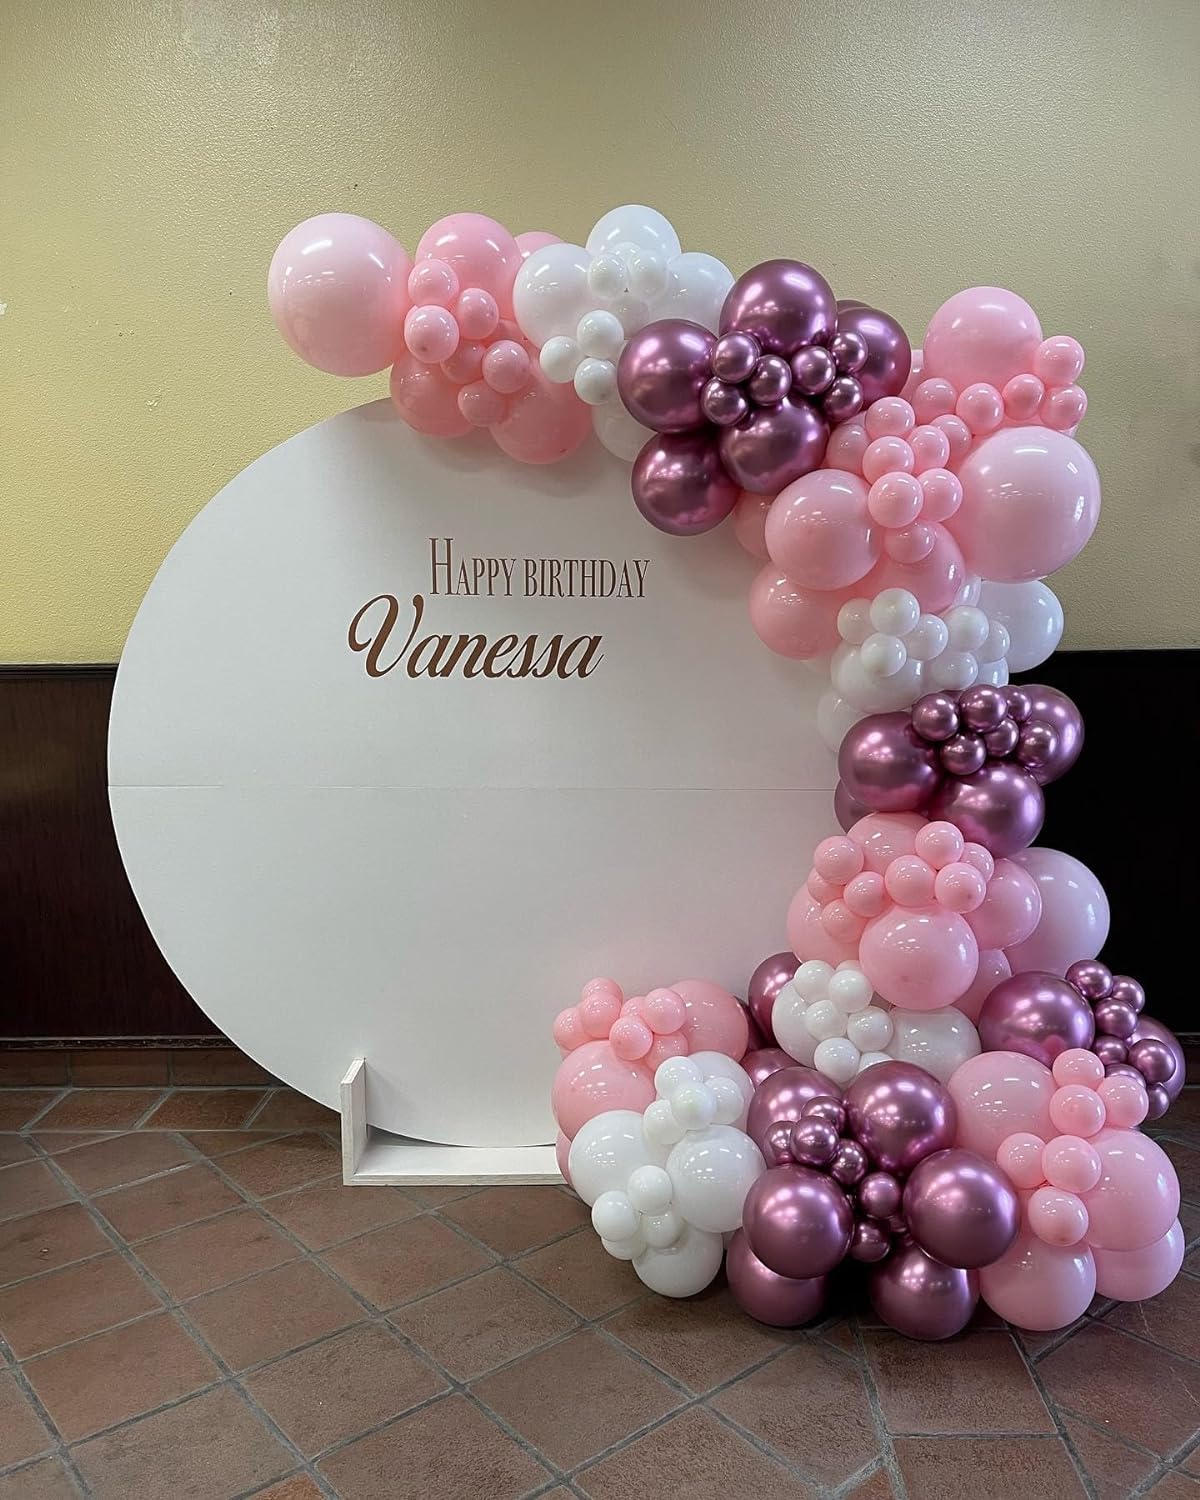 Pink Balloon Arch Kit, 140Pcs Pastel Light Metallic Pink and White Balloons with Pink Confetti Balloon Garland Kit for Birthday, Wedding, Engagements, Baby Shower, Anniversary Party Decoration